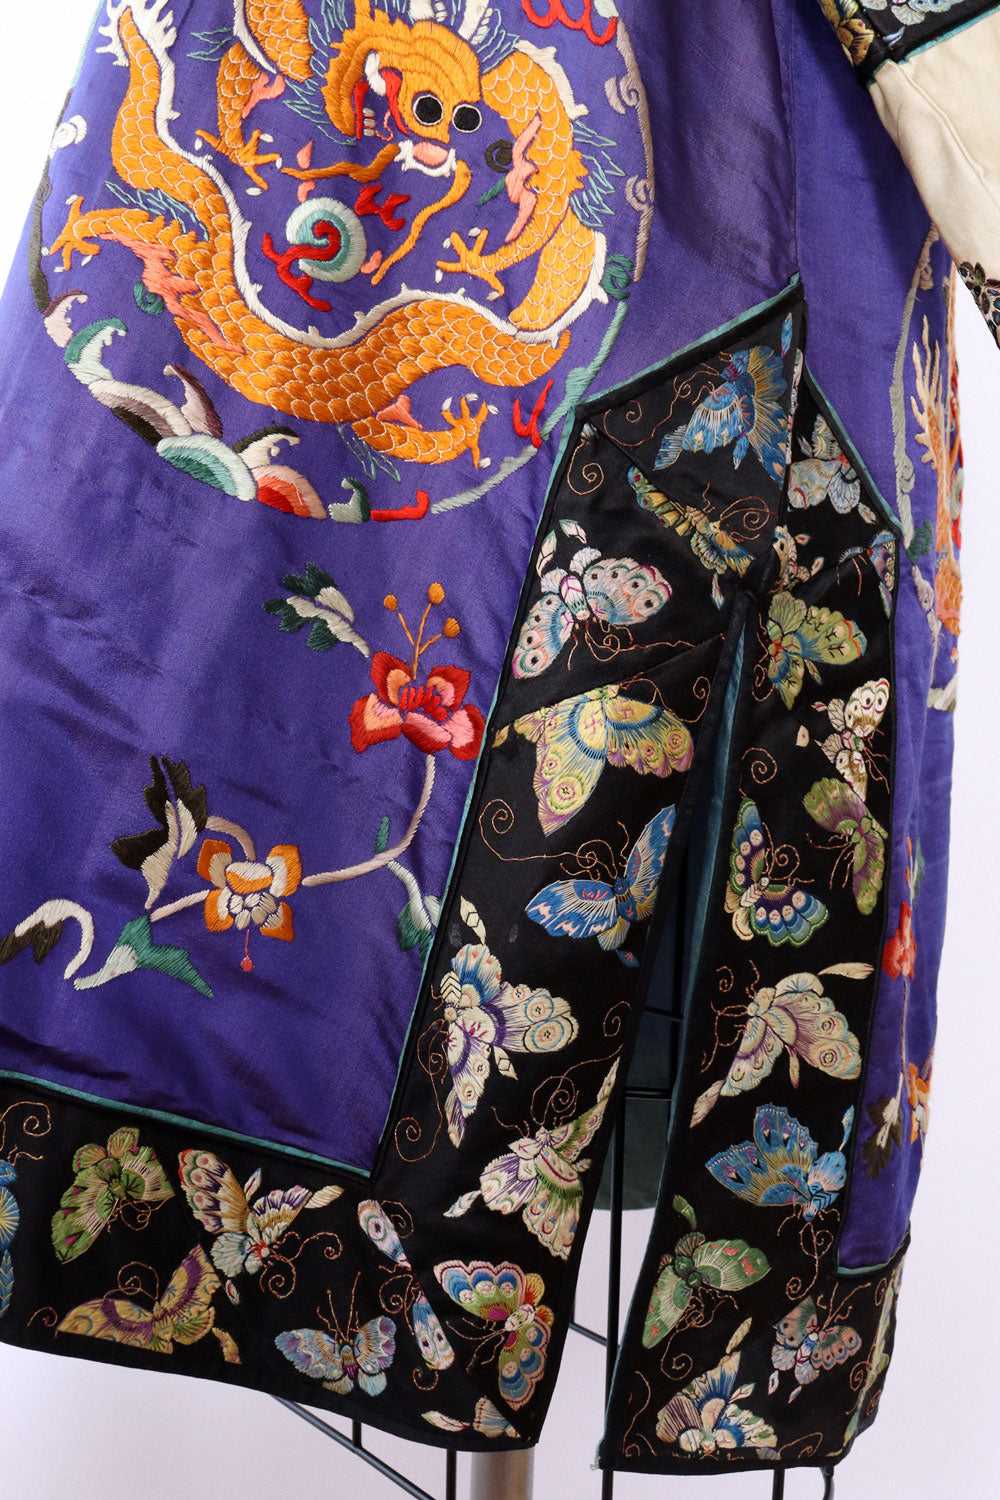 Qing Dynasty Silk Embroidered Robe - image 8